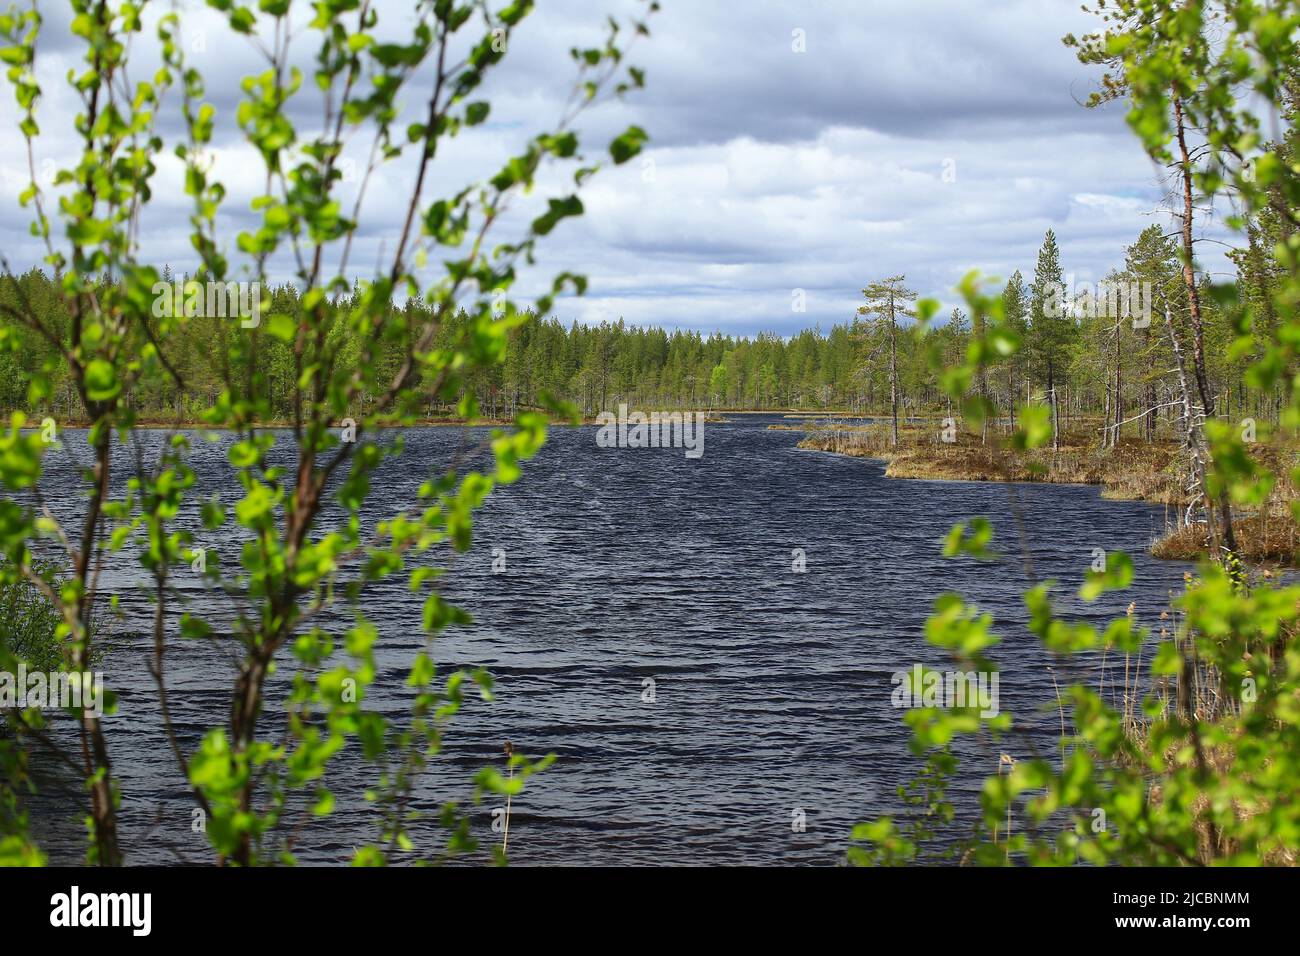 View over small river in Swedish Lapland with defocused birches in foreground. Stock Photo